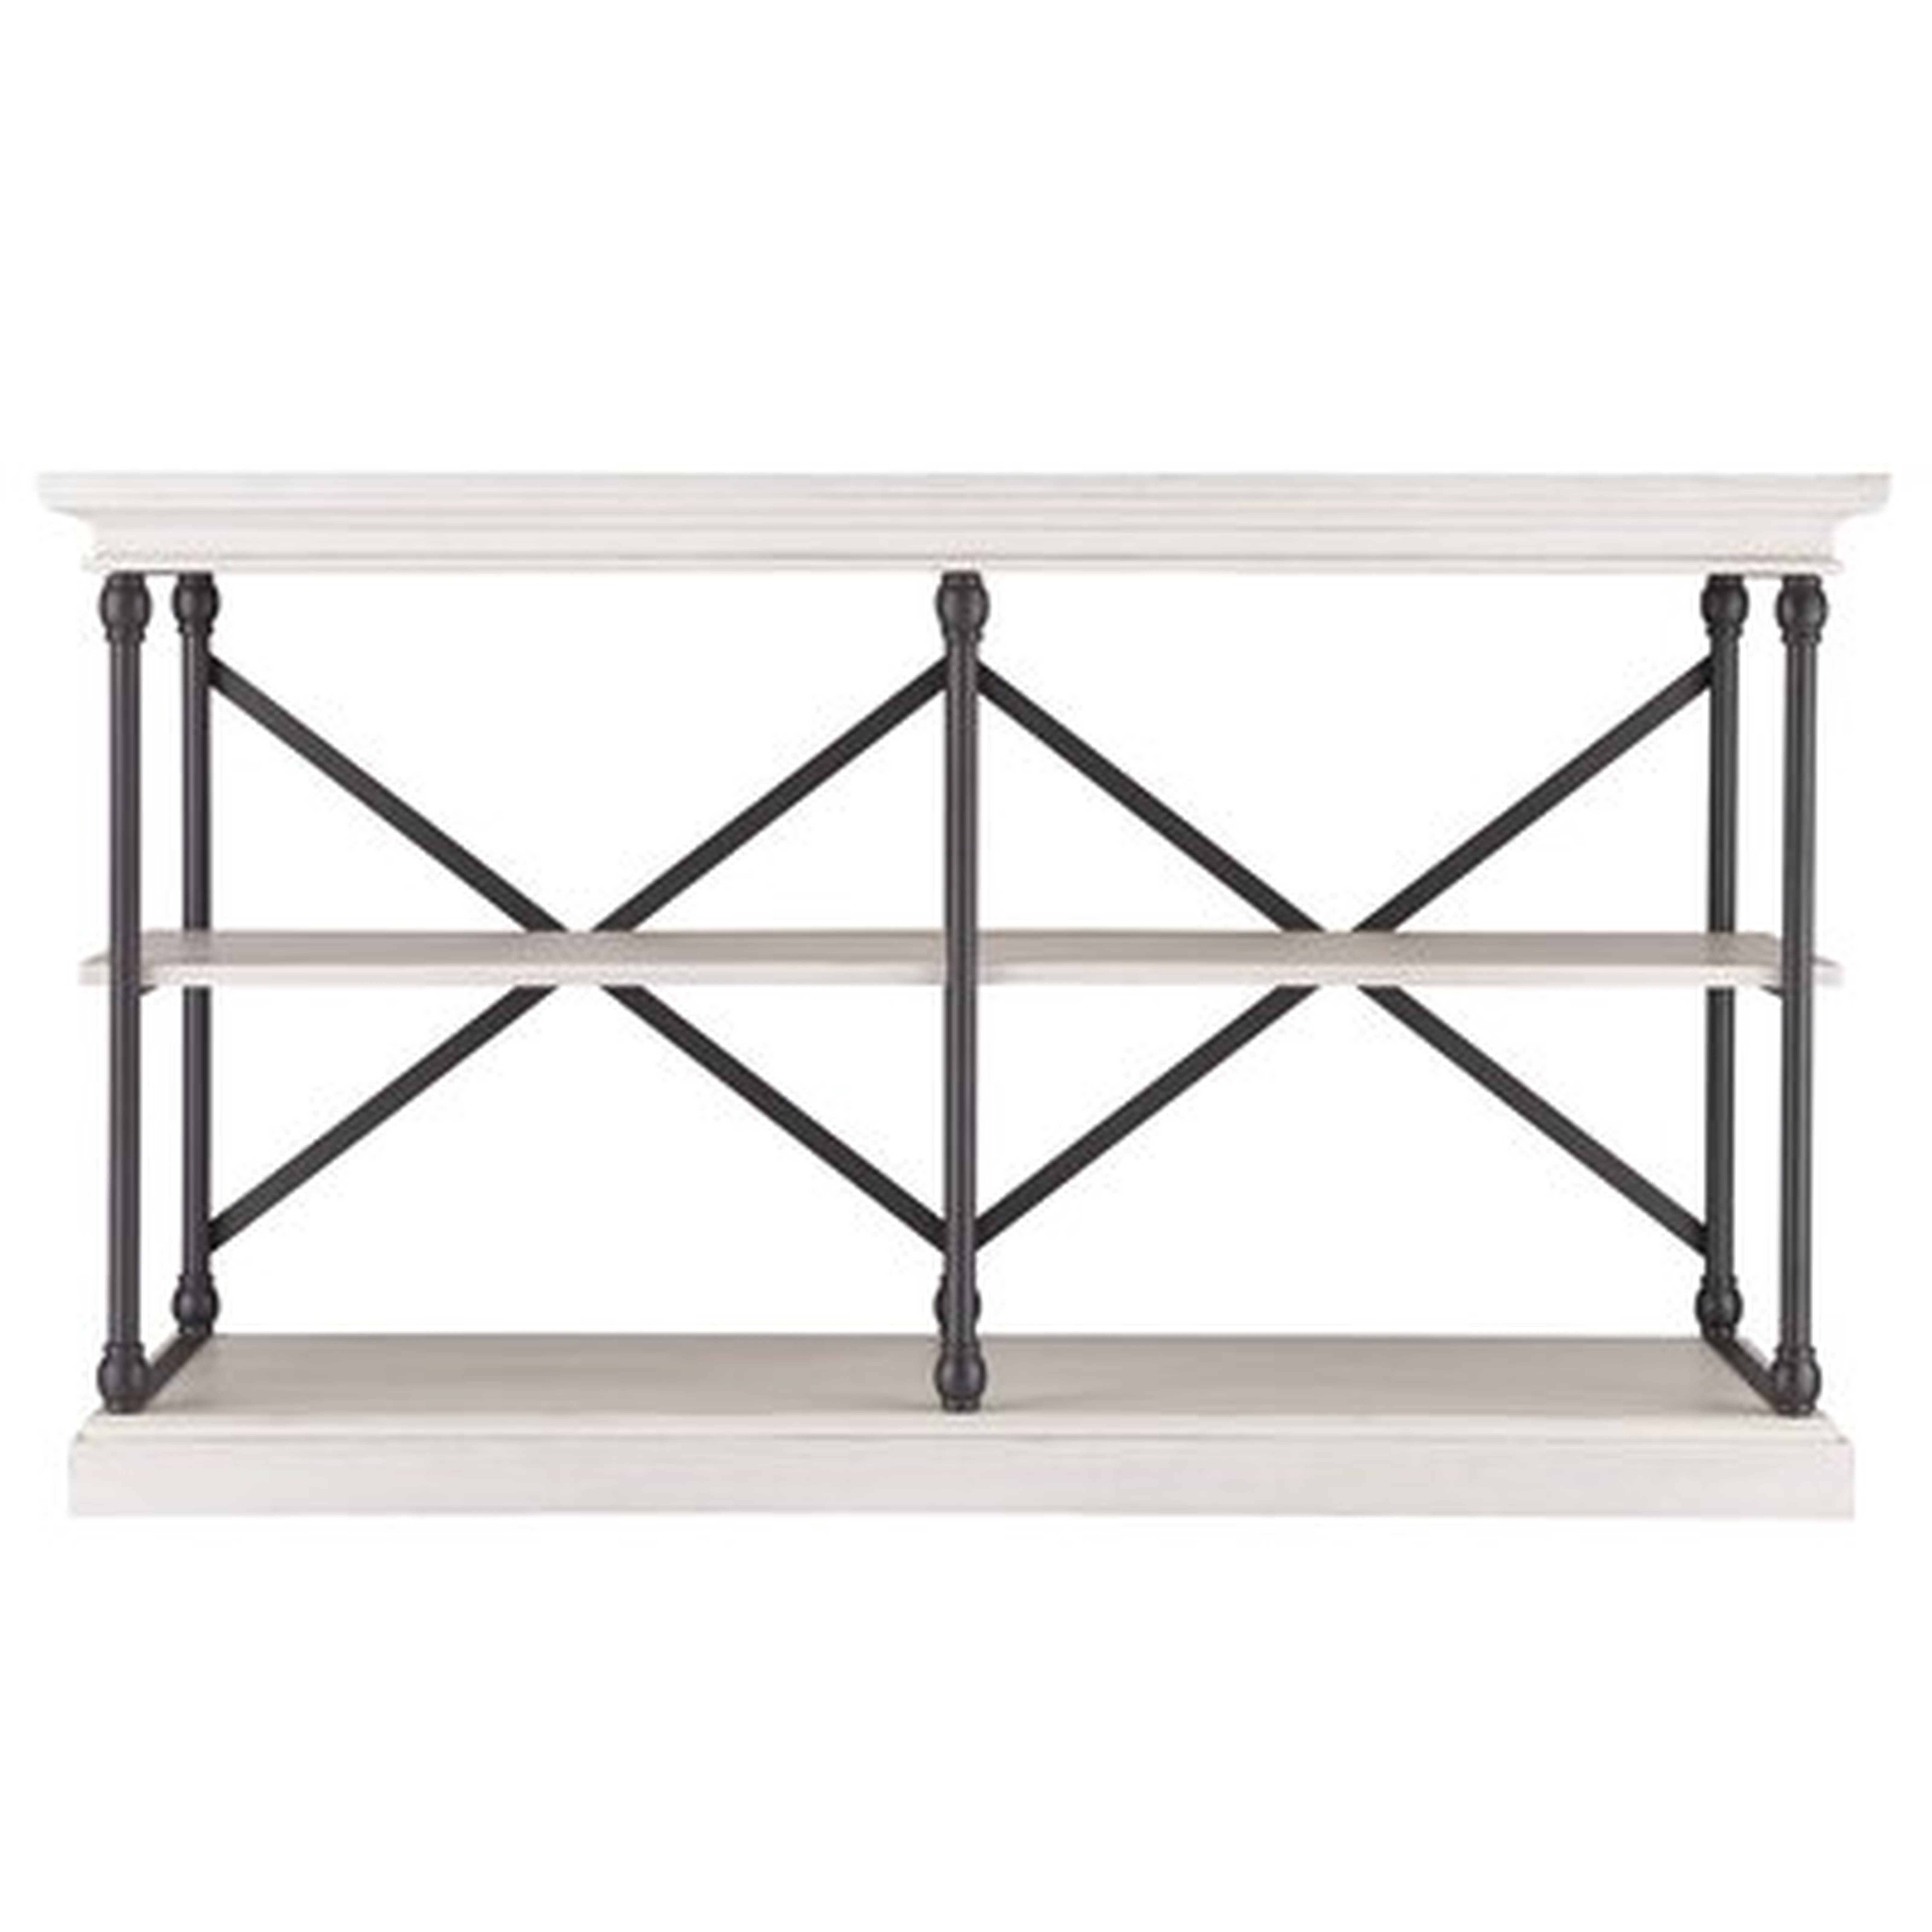 Kinney TV Stand for TVs up to 65 inches - Birch Lane